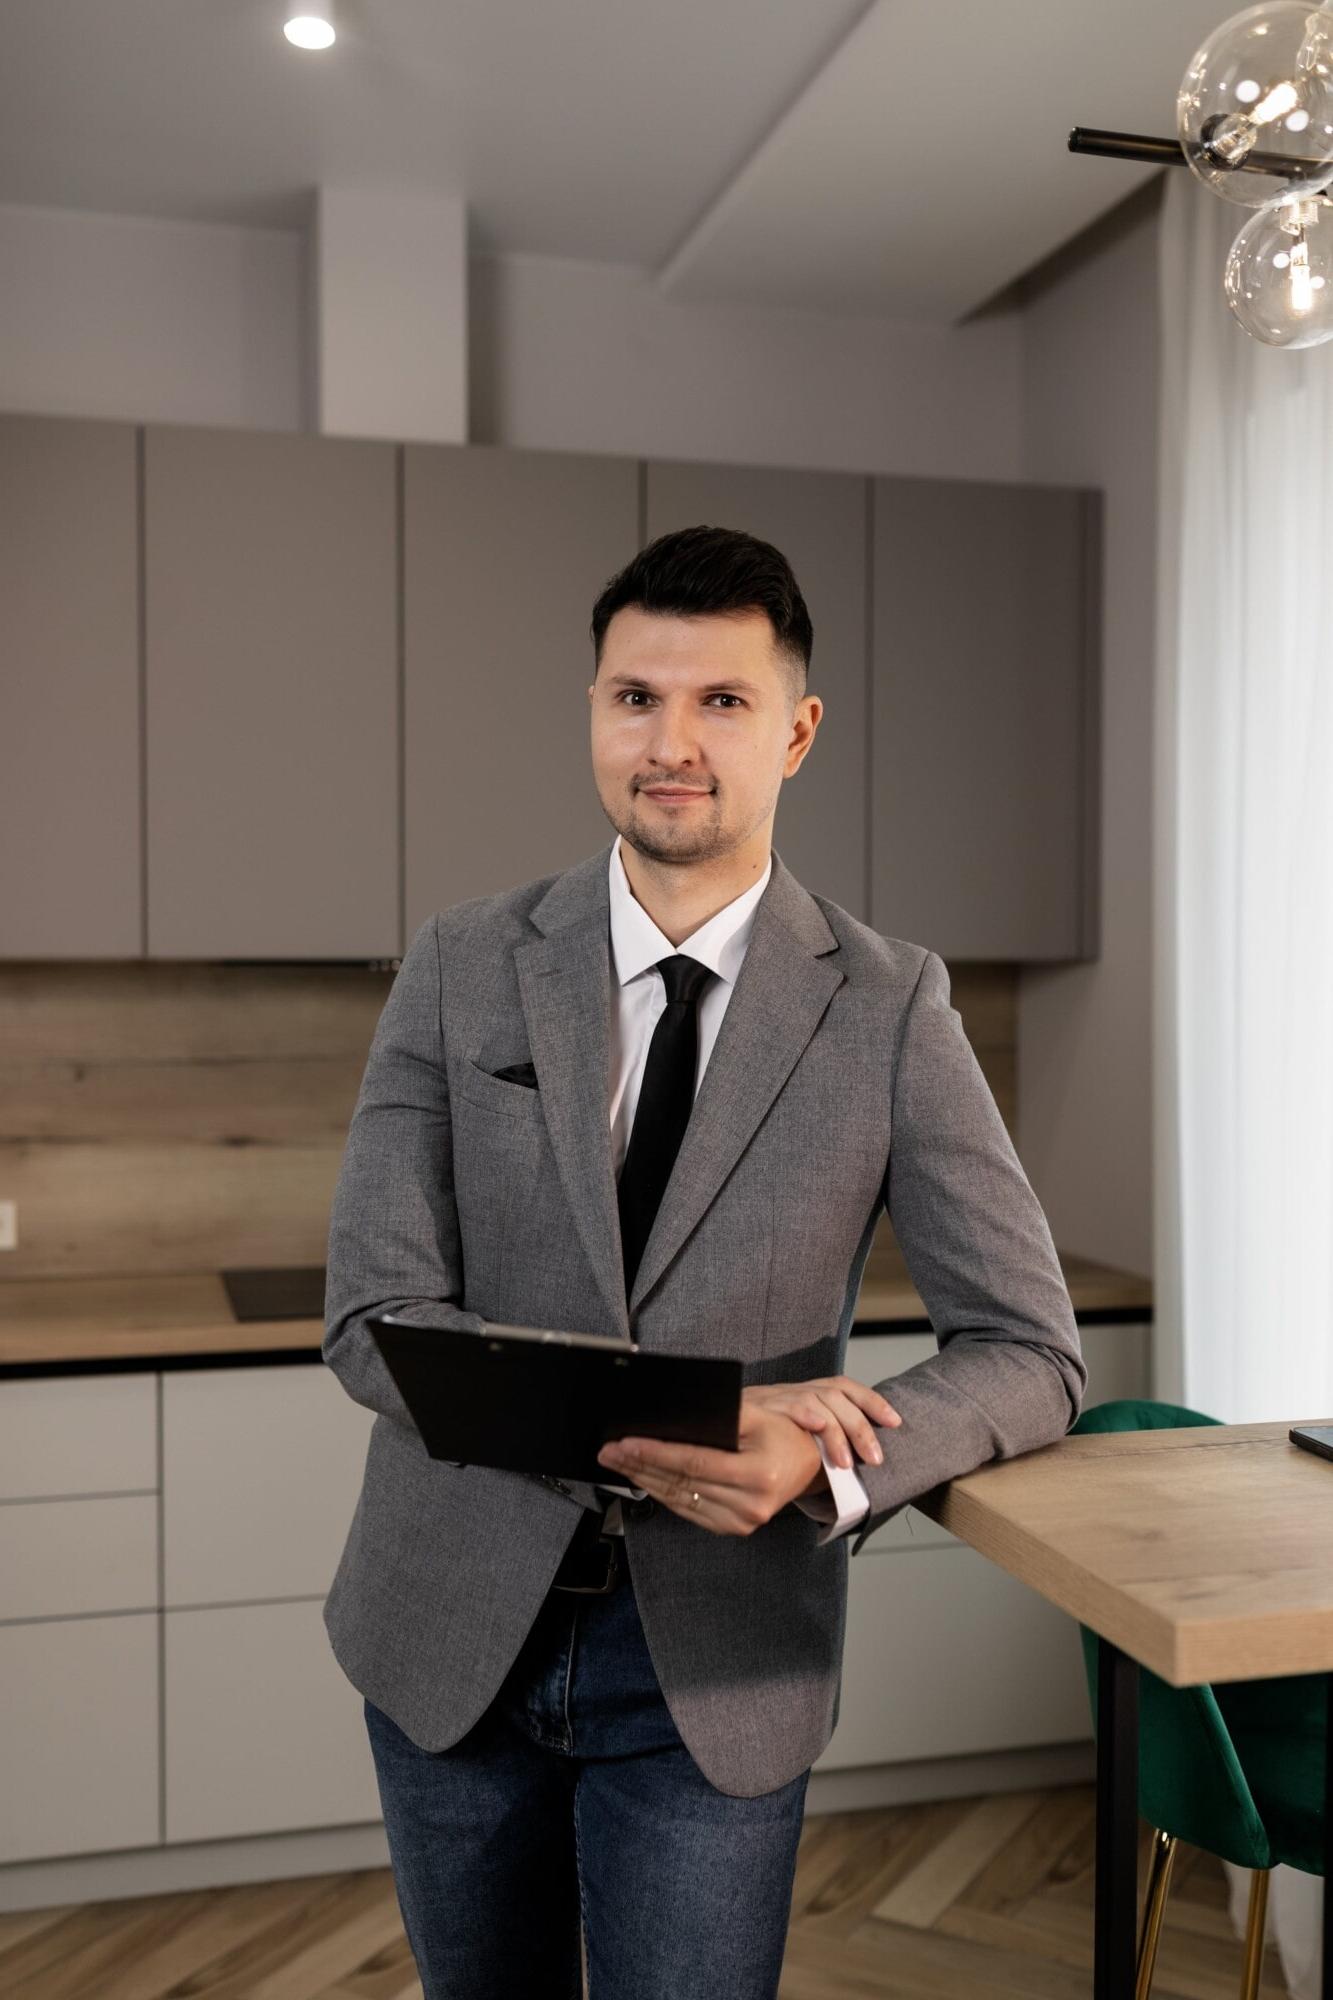 How Often Should a Landlord Inspect Rental Property?